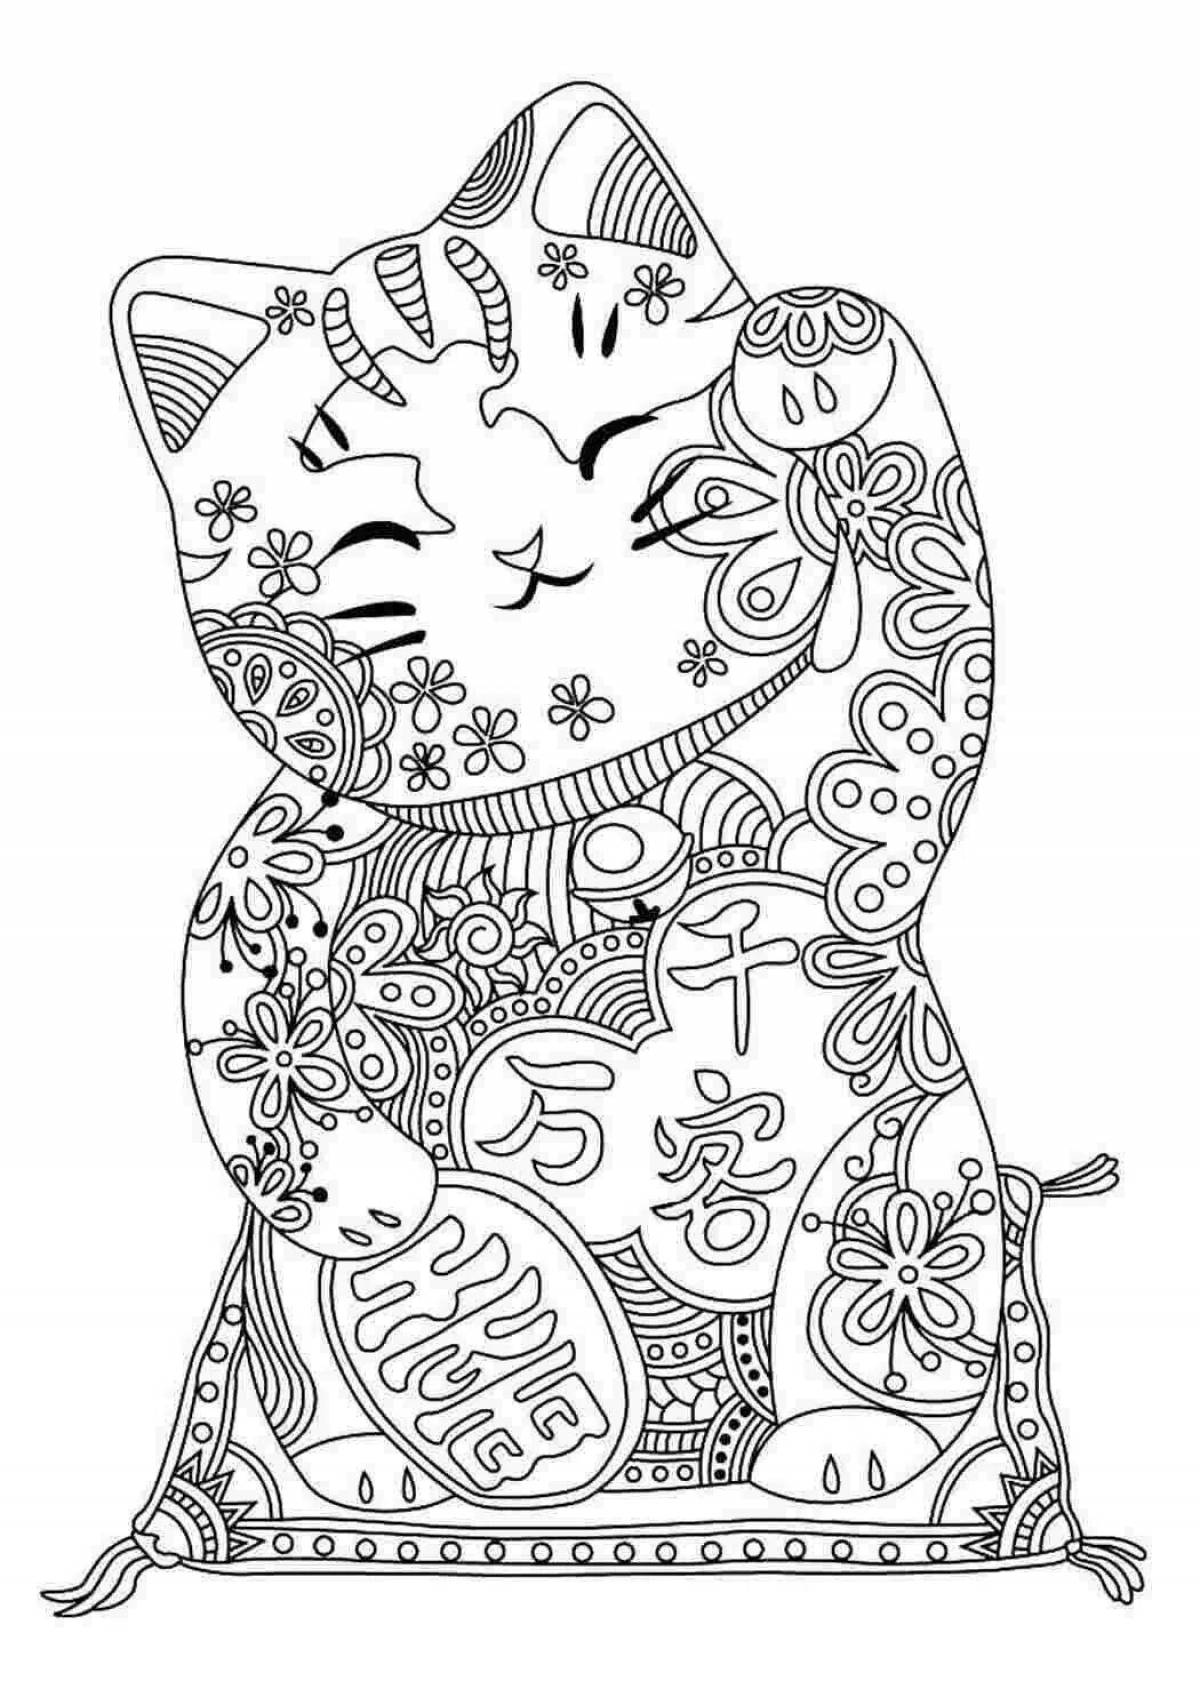 Blissful anti-stress coloring book